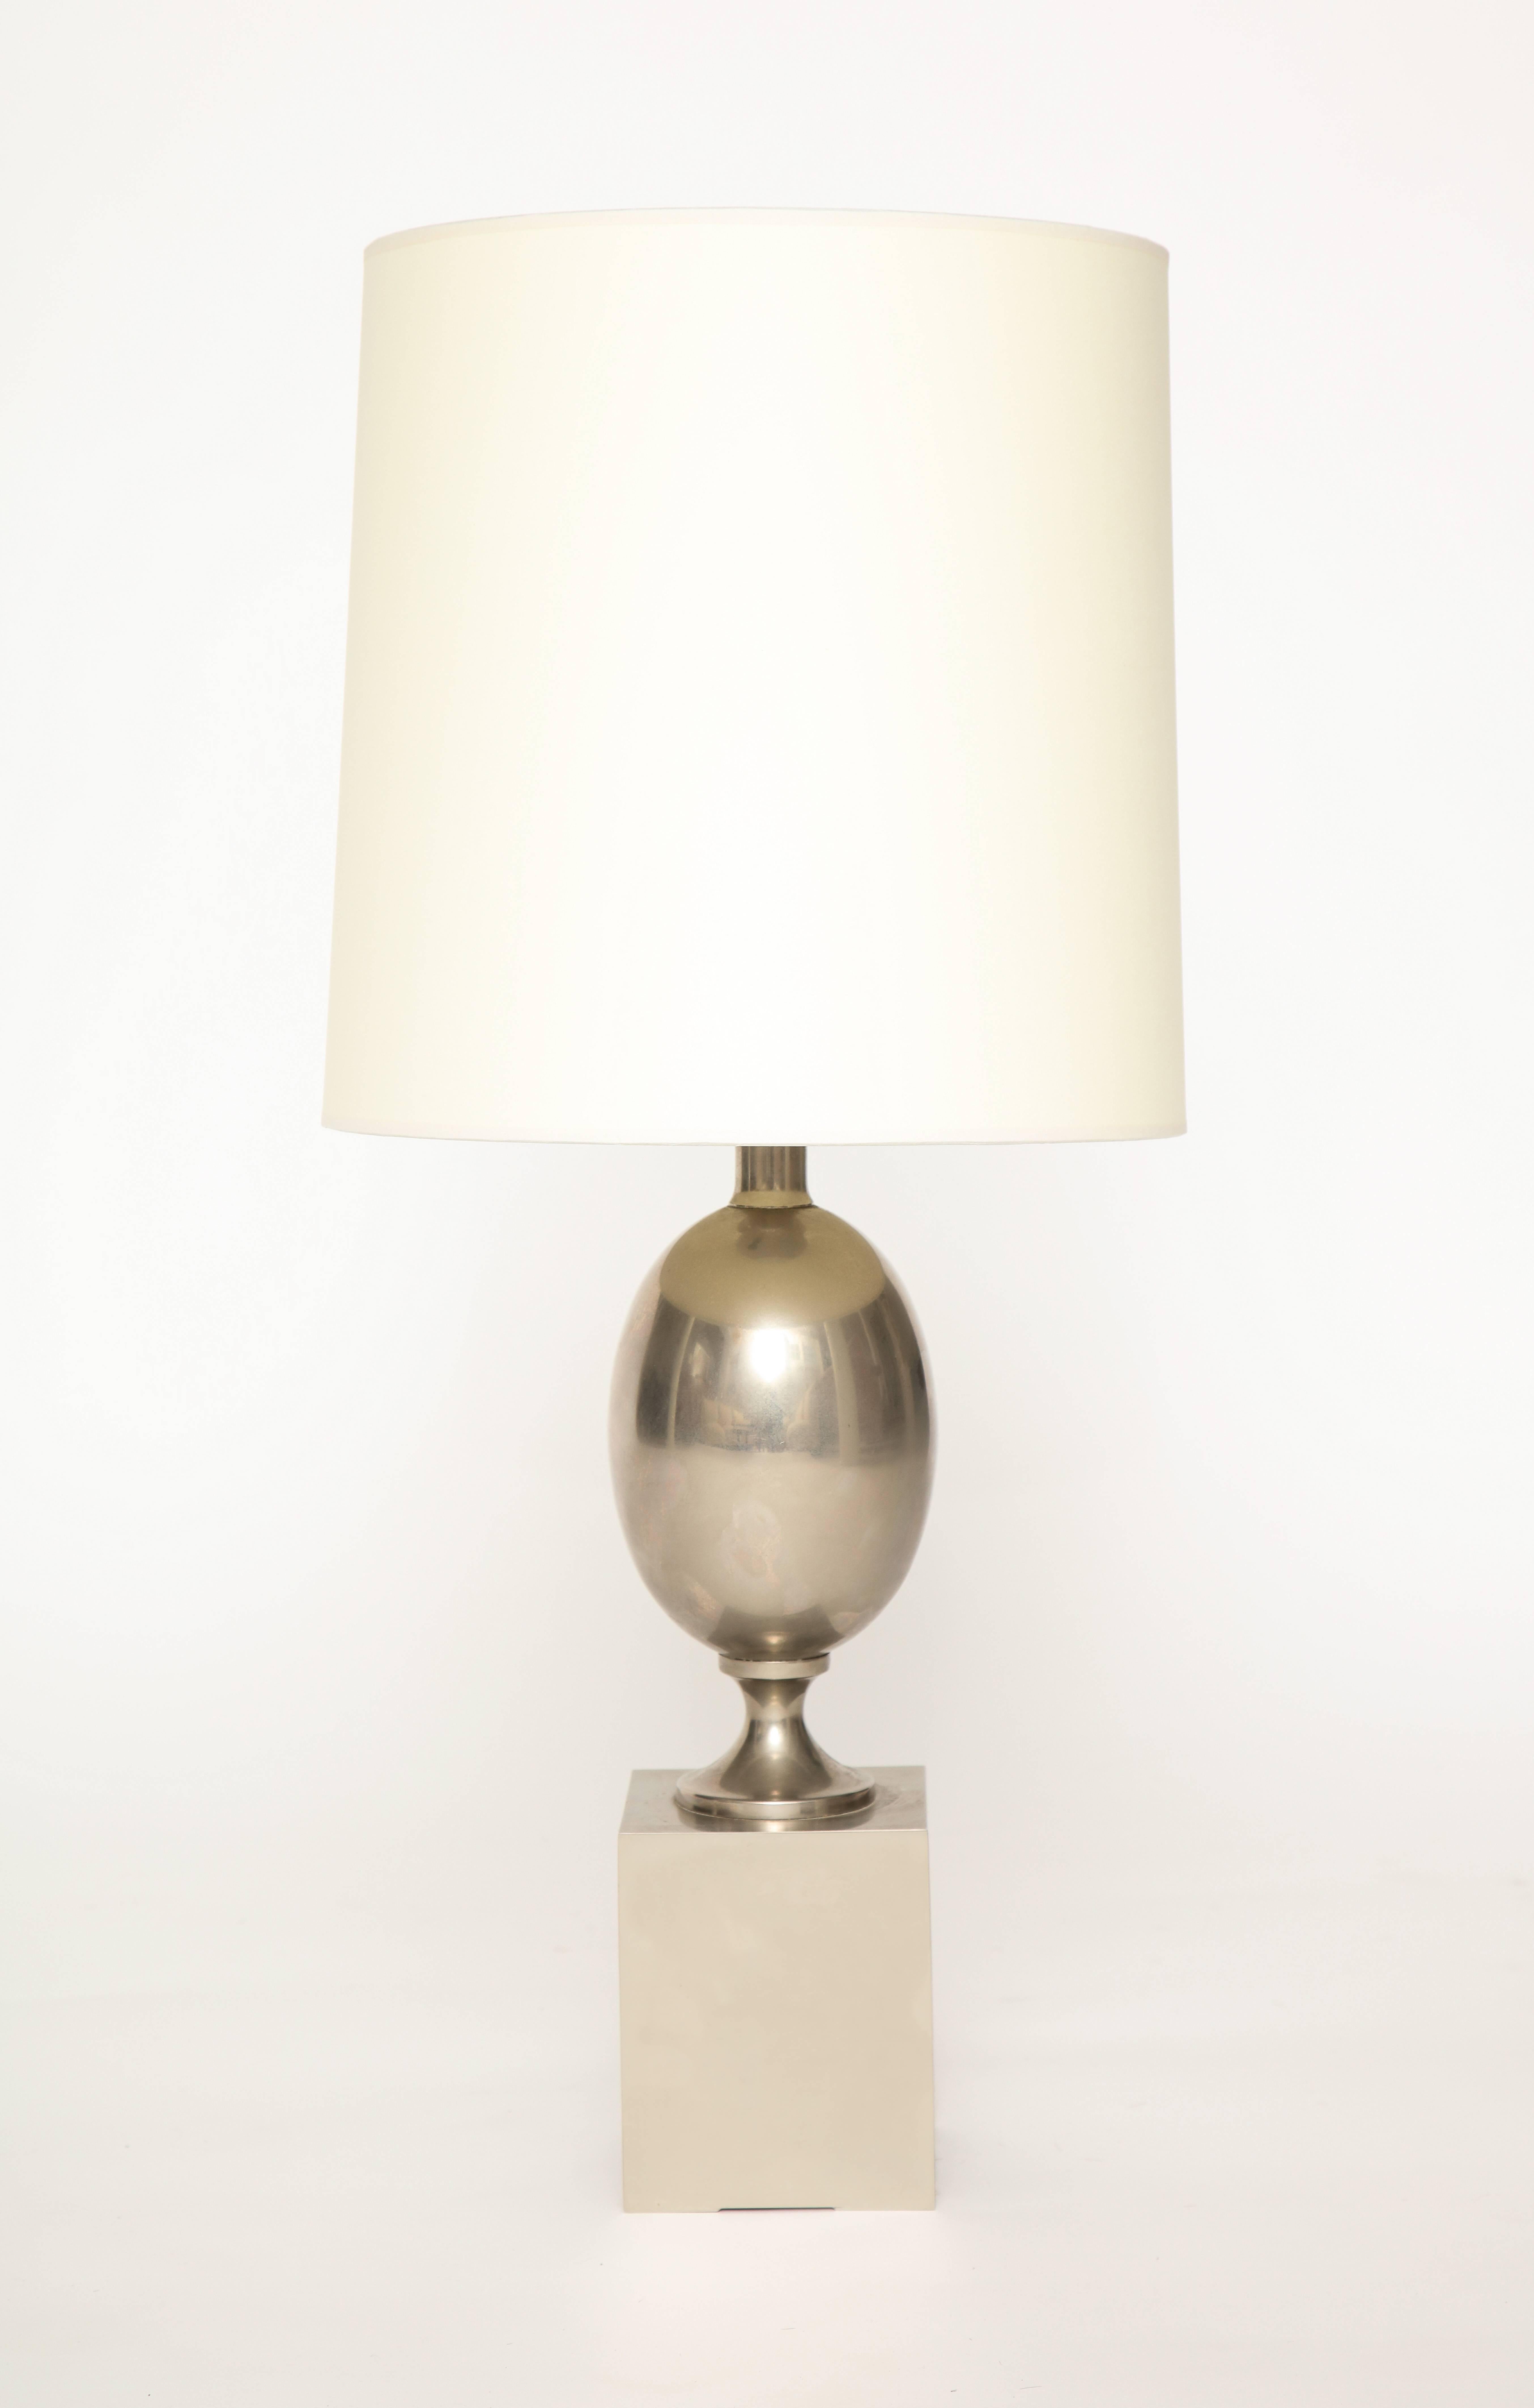 Maison Barbier steel French 1970s table lamp, midcentury

Signed Barbier steel table lamp, 1970s.